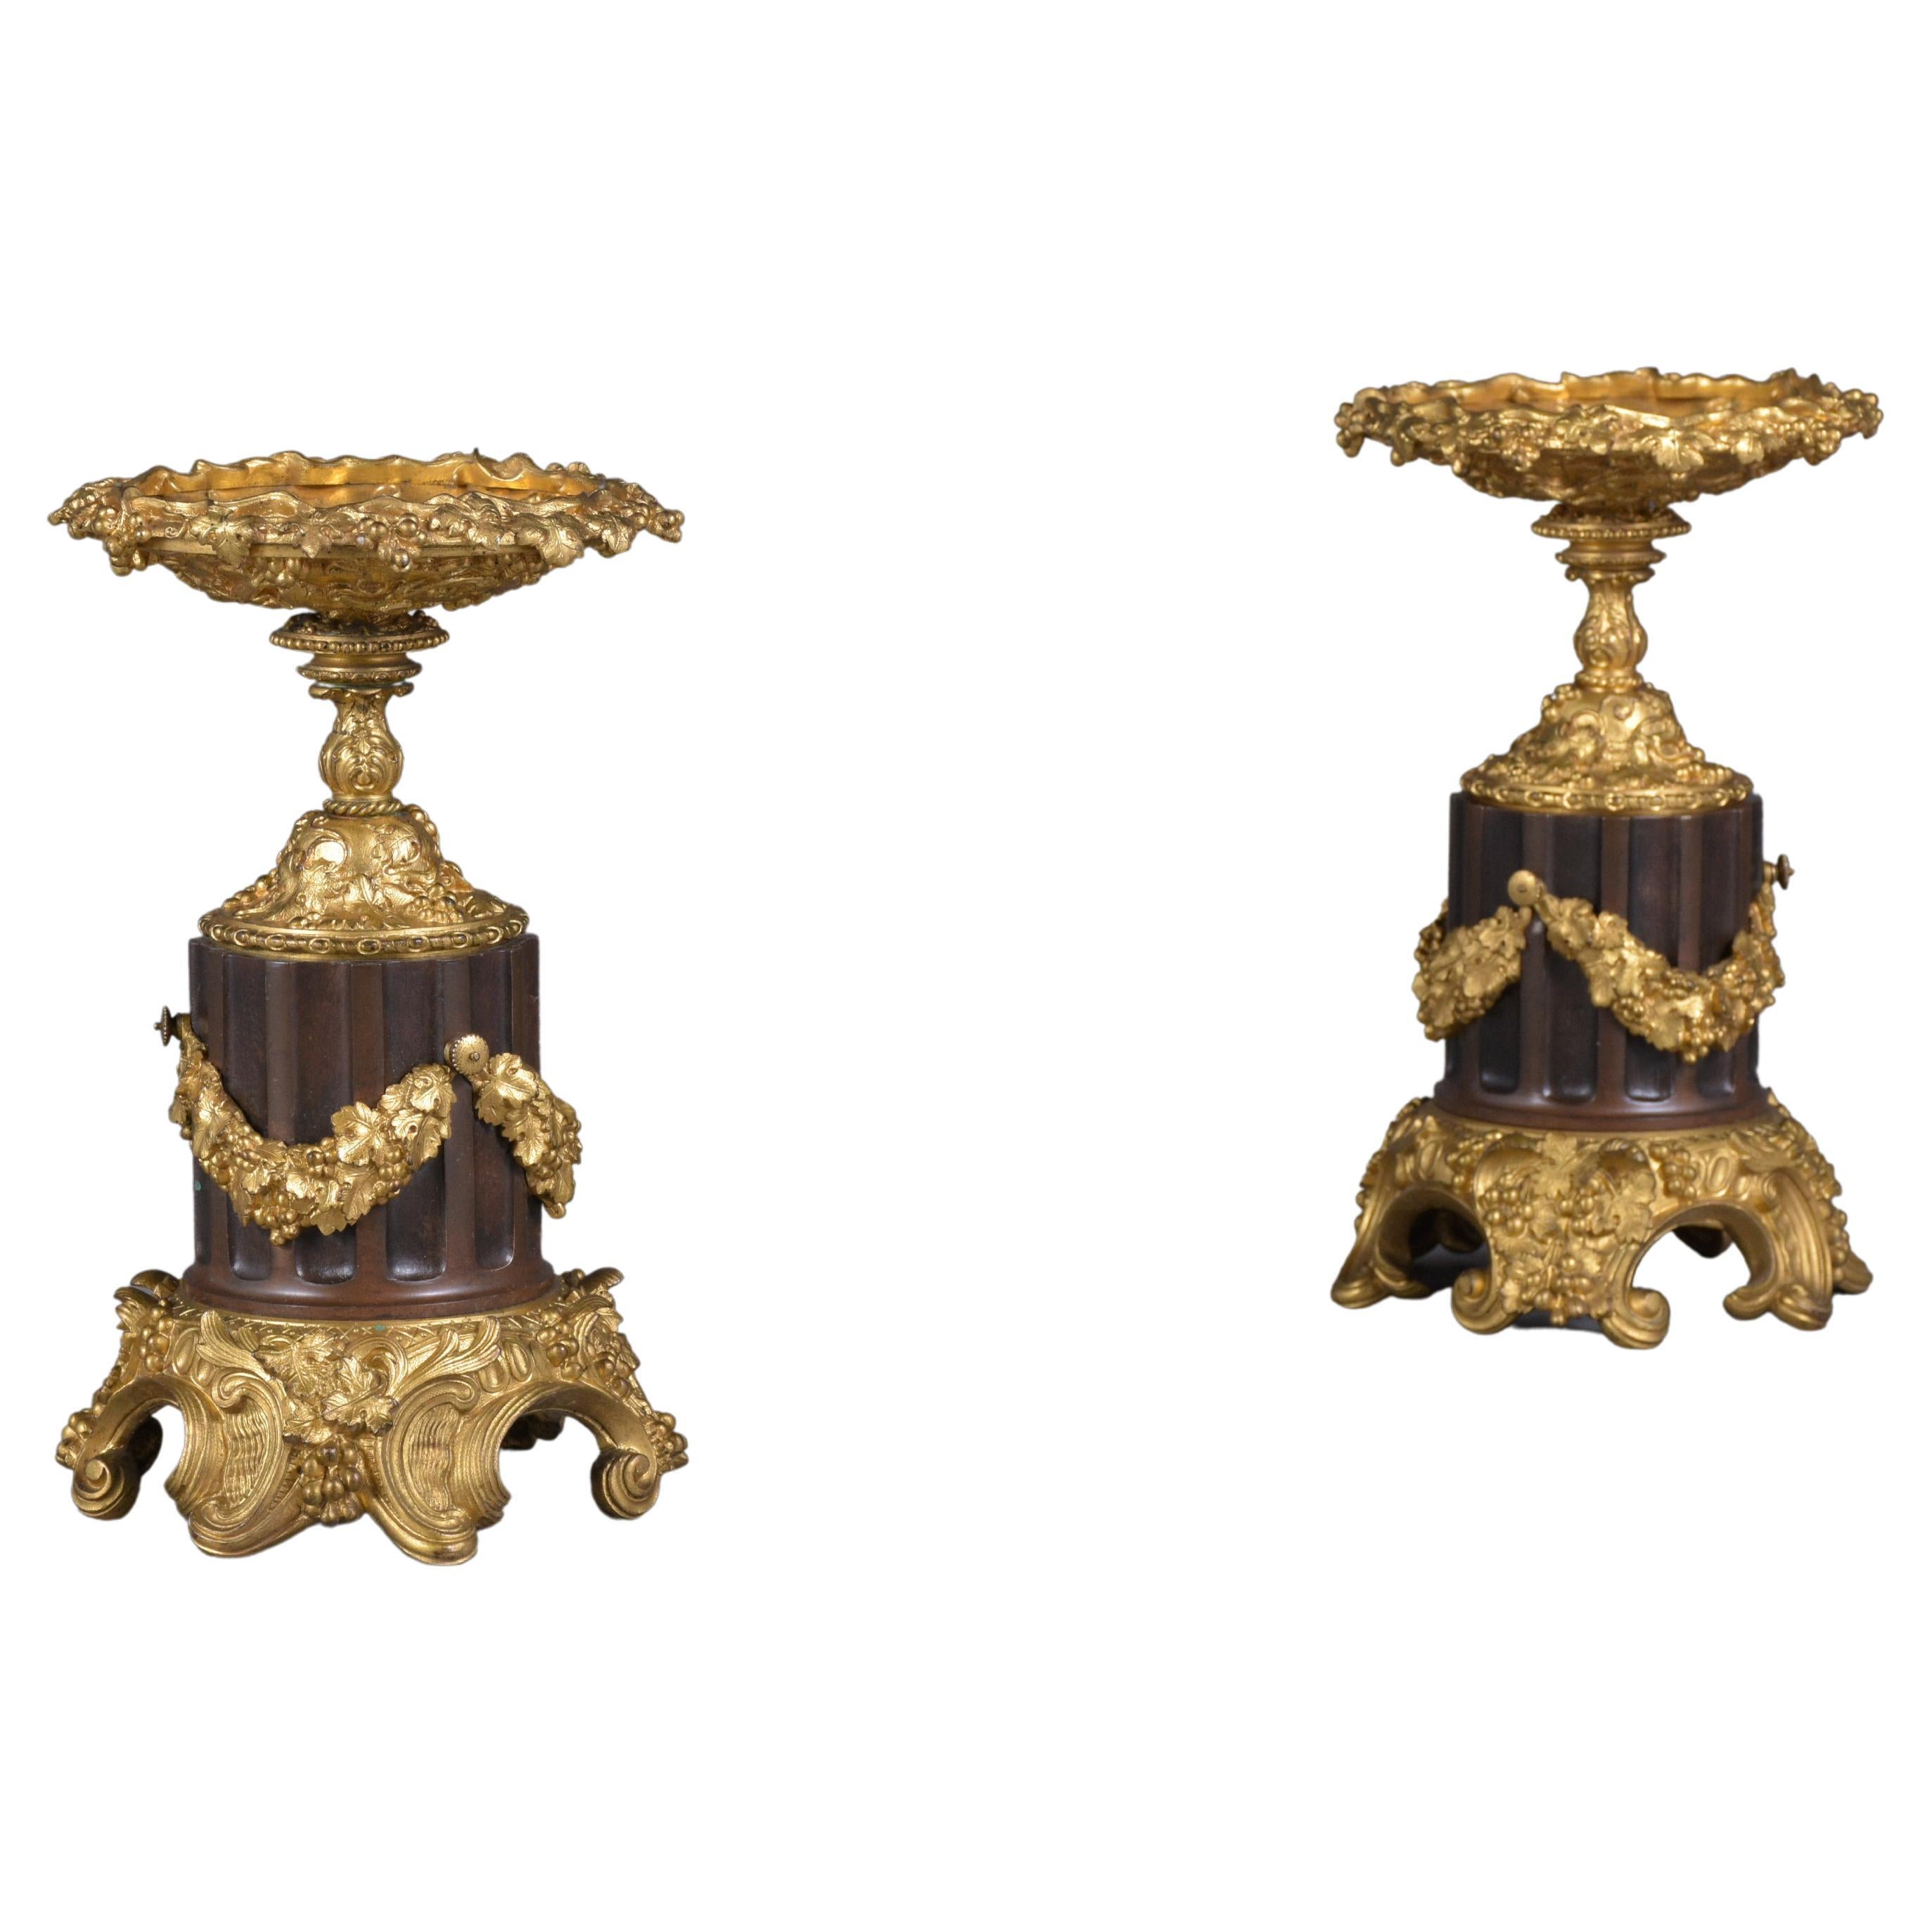 Step into the world of classical elegance with our exquisite pair of Early 19th-century French Urns, masterpieces of craftsmanship and historical beauty. These antique cassolettes, crafted from bronzed material, have been professionally restored by